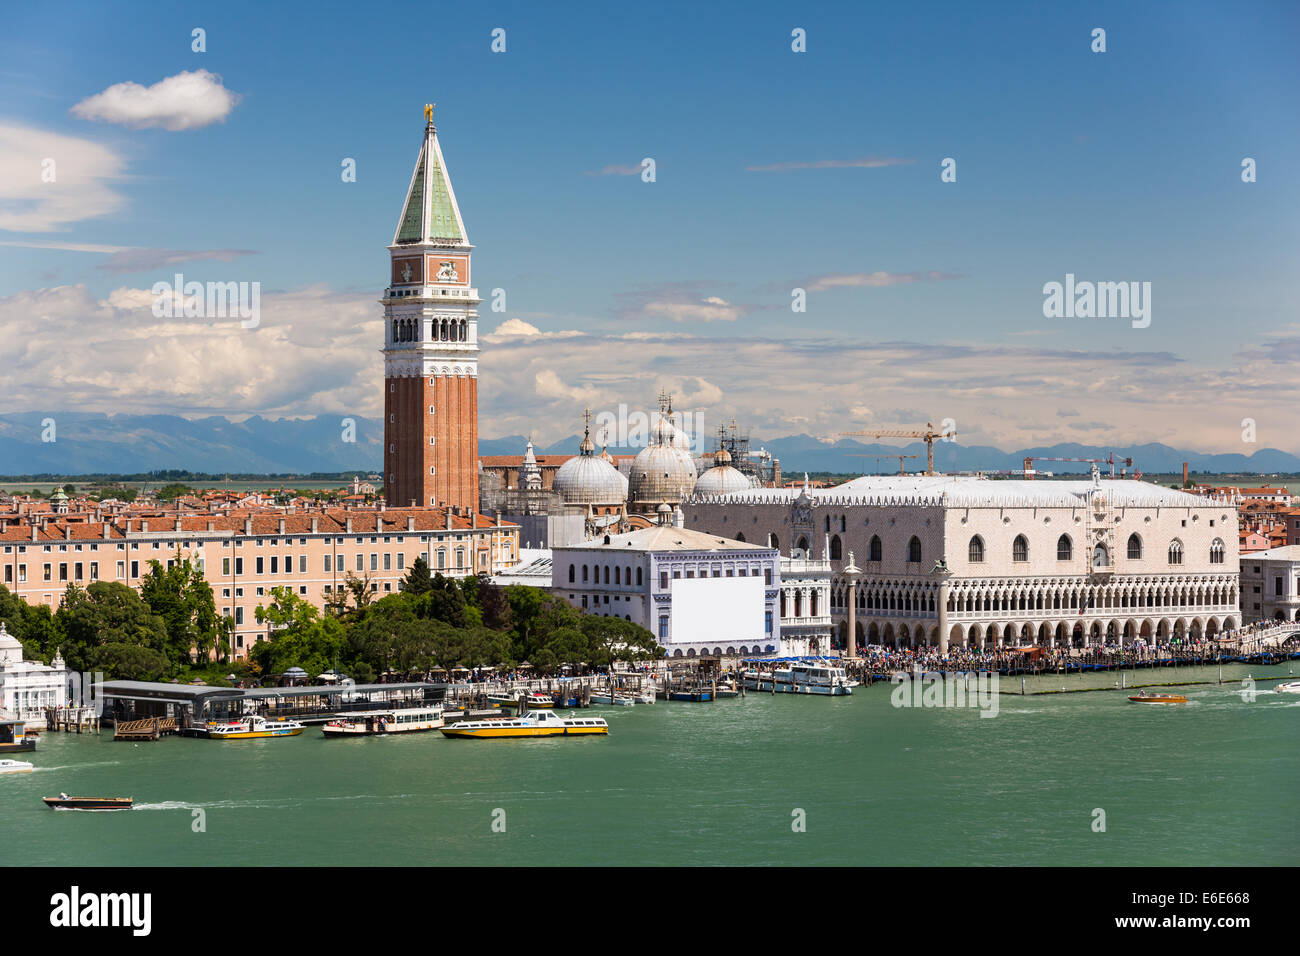 St Marks bell tower and Doges palace seen from the Giudecca canal Stock Photo